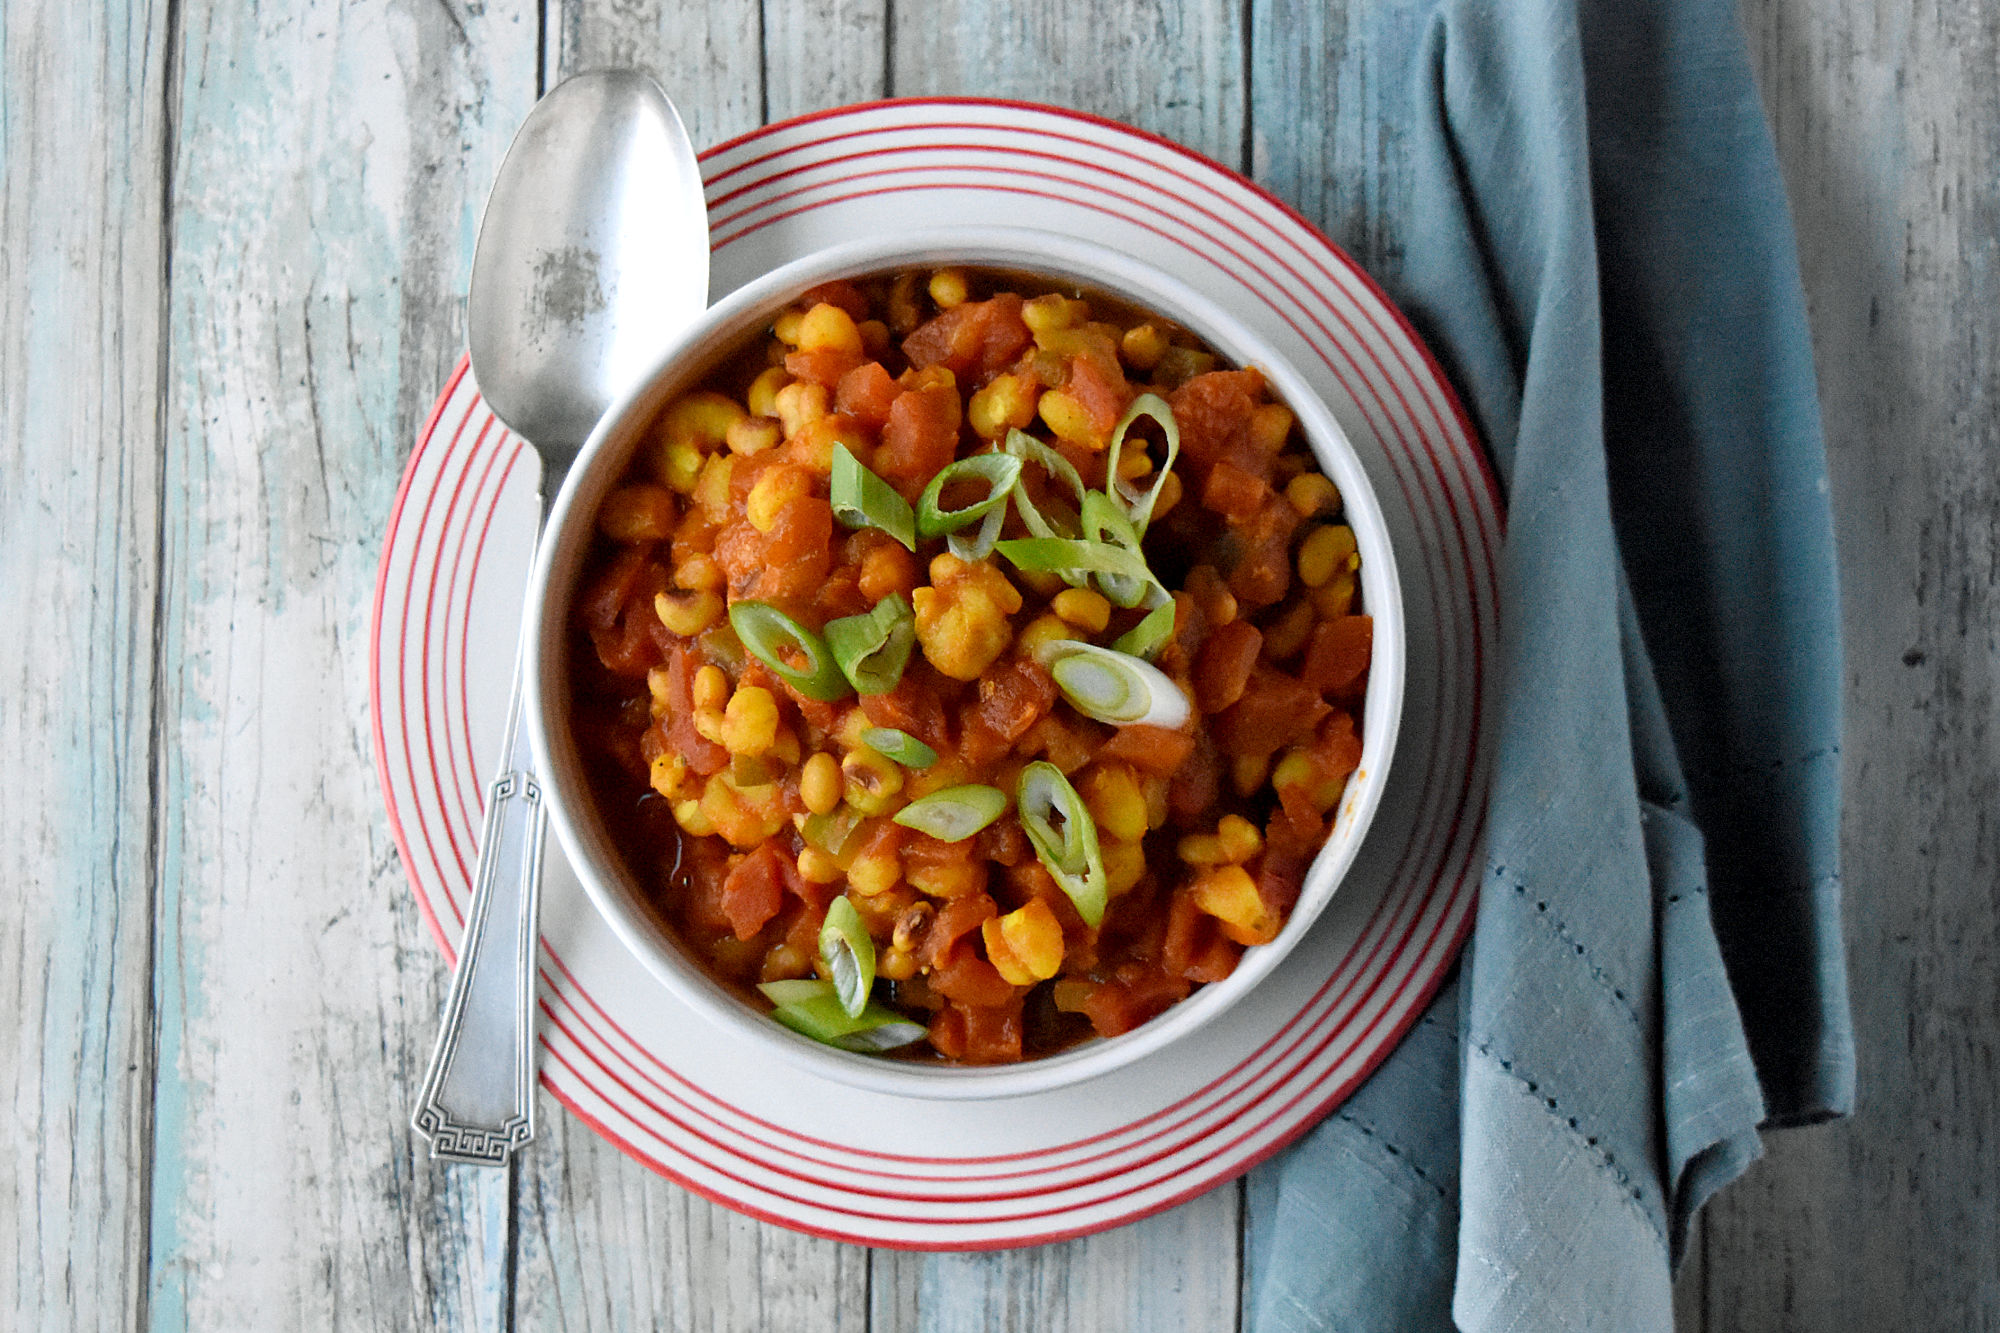 Quick Samp and Beans is a quick version of a delicious African classic recipe.